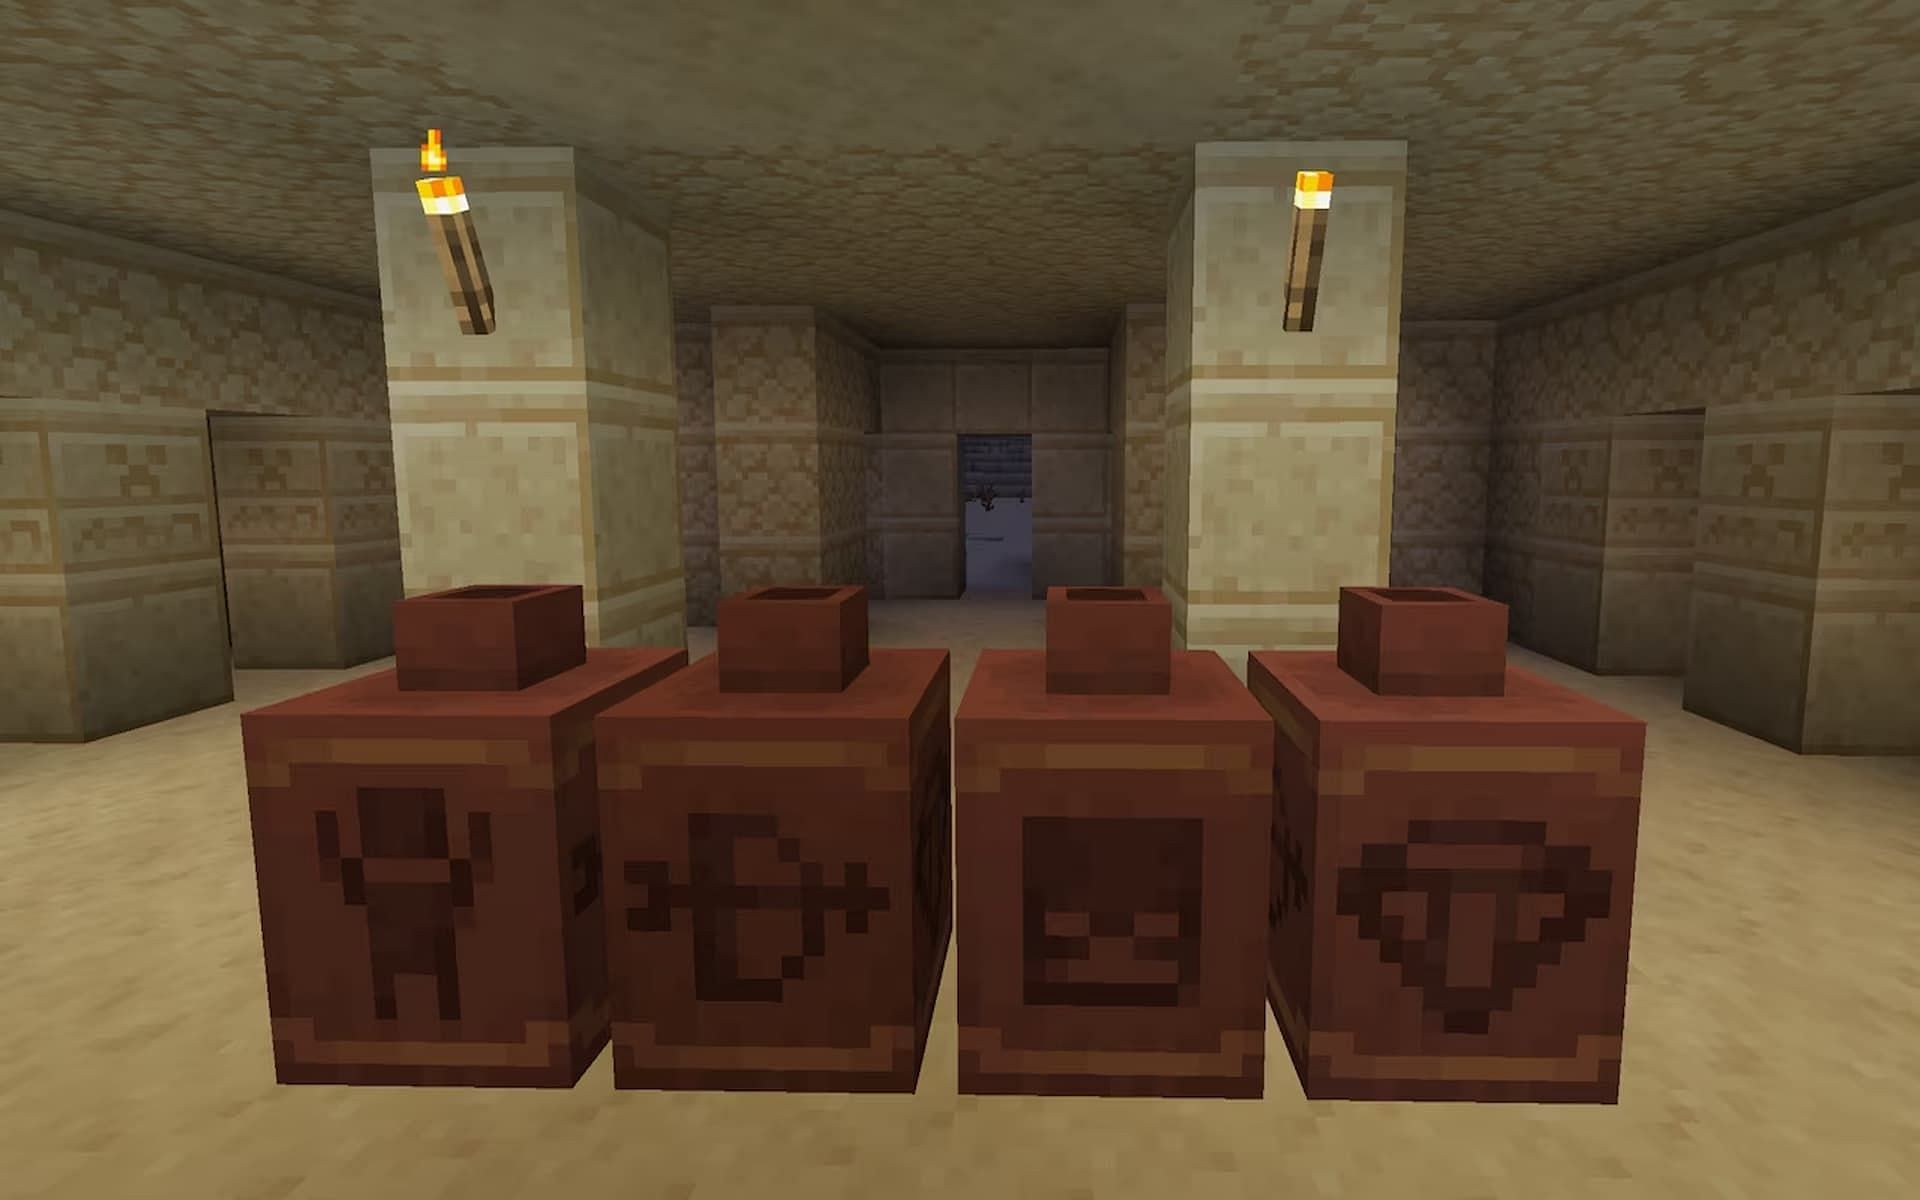 Uncovering pottery shards can allow players to piece together decorated pots (Image via Mojang)